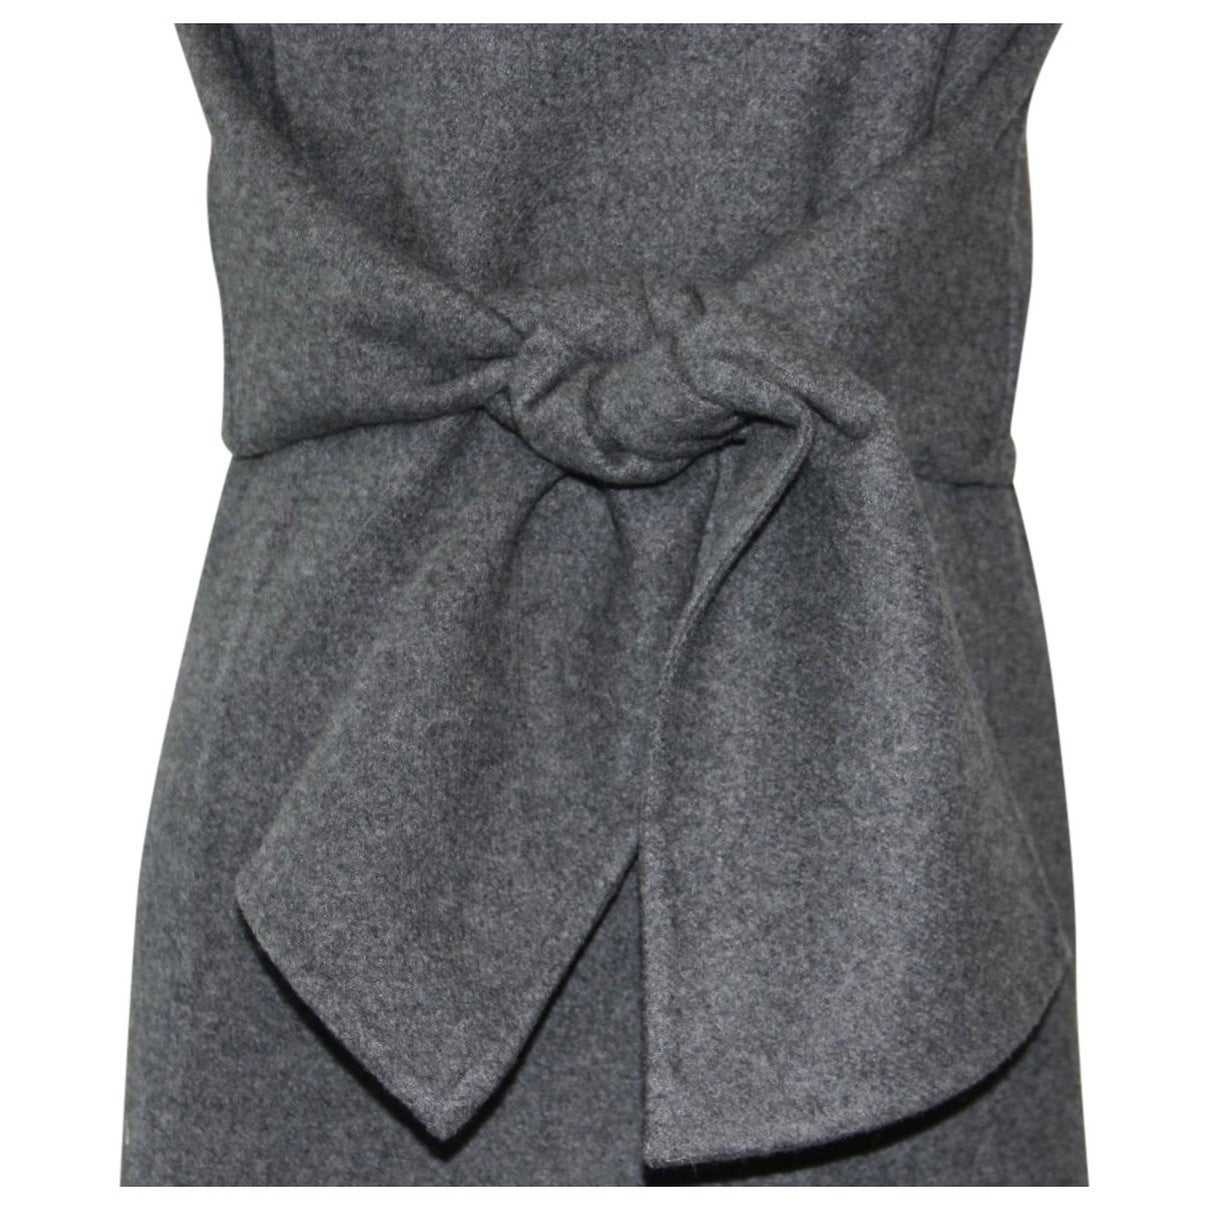 Unworn grey cashmere dress with knotted sleeve detail designed by Phoebe Philo for Celine fall 2013.  French size 36 (size tag removed). Approximate measurements: Shoulder 15'', bust 32'', waist 28'', hip 35'' and length 33.5''. Double-faced